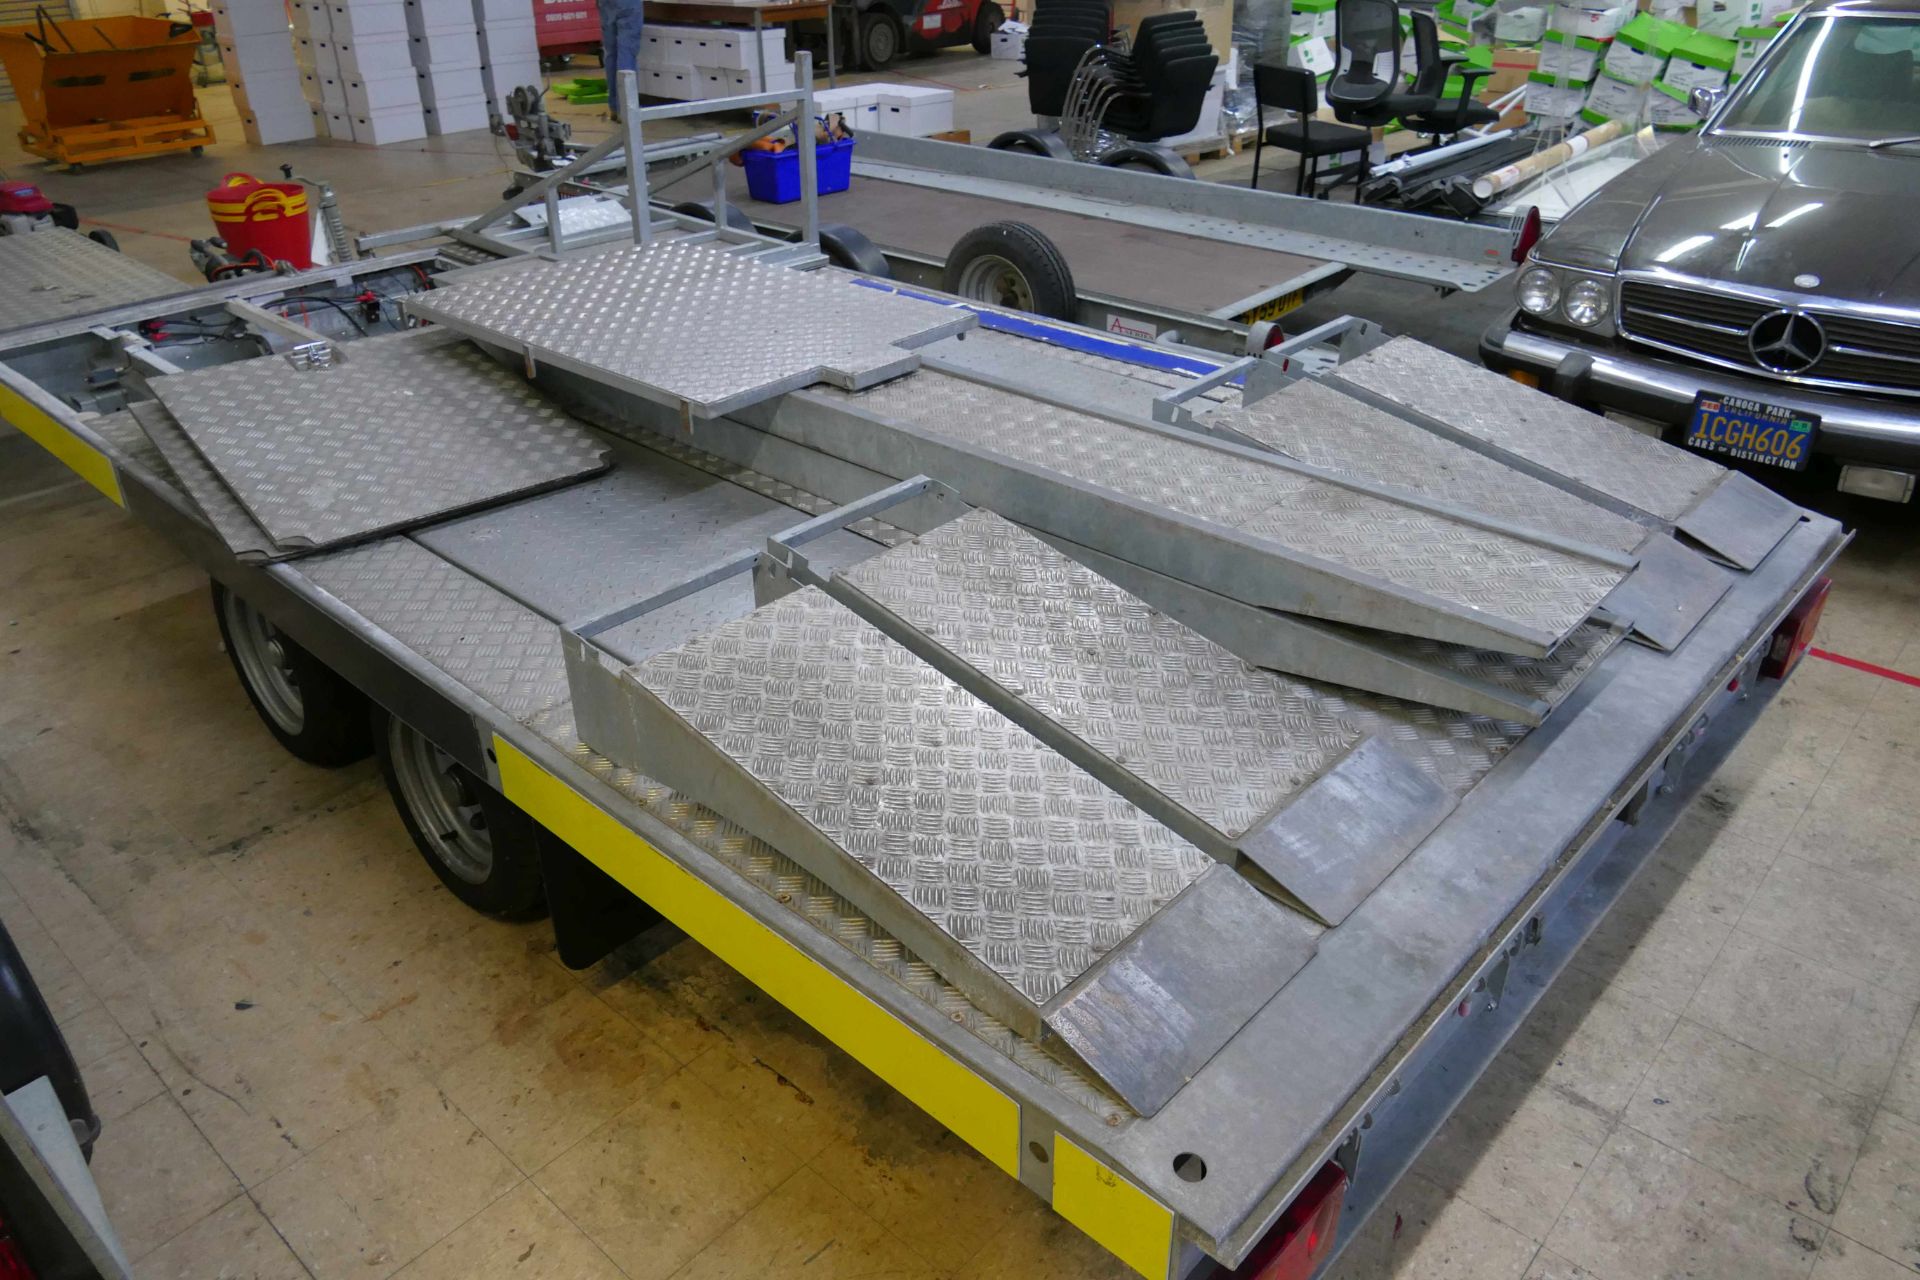 Trailerlift MPT10 TWIN AXLE SPECIAL PURPOSE TRAILER, serial no. 100304, 4.3m long on main body, with - Image 3 of 11